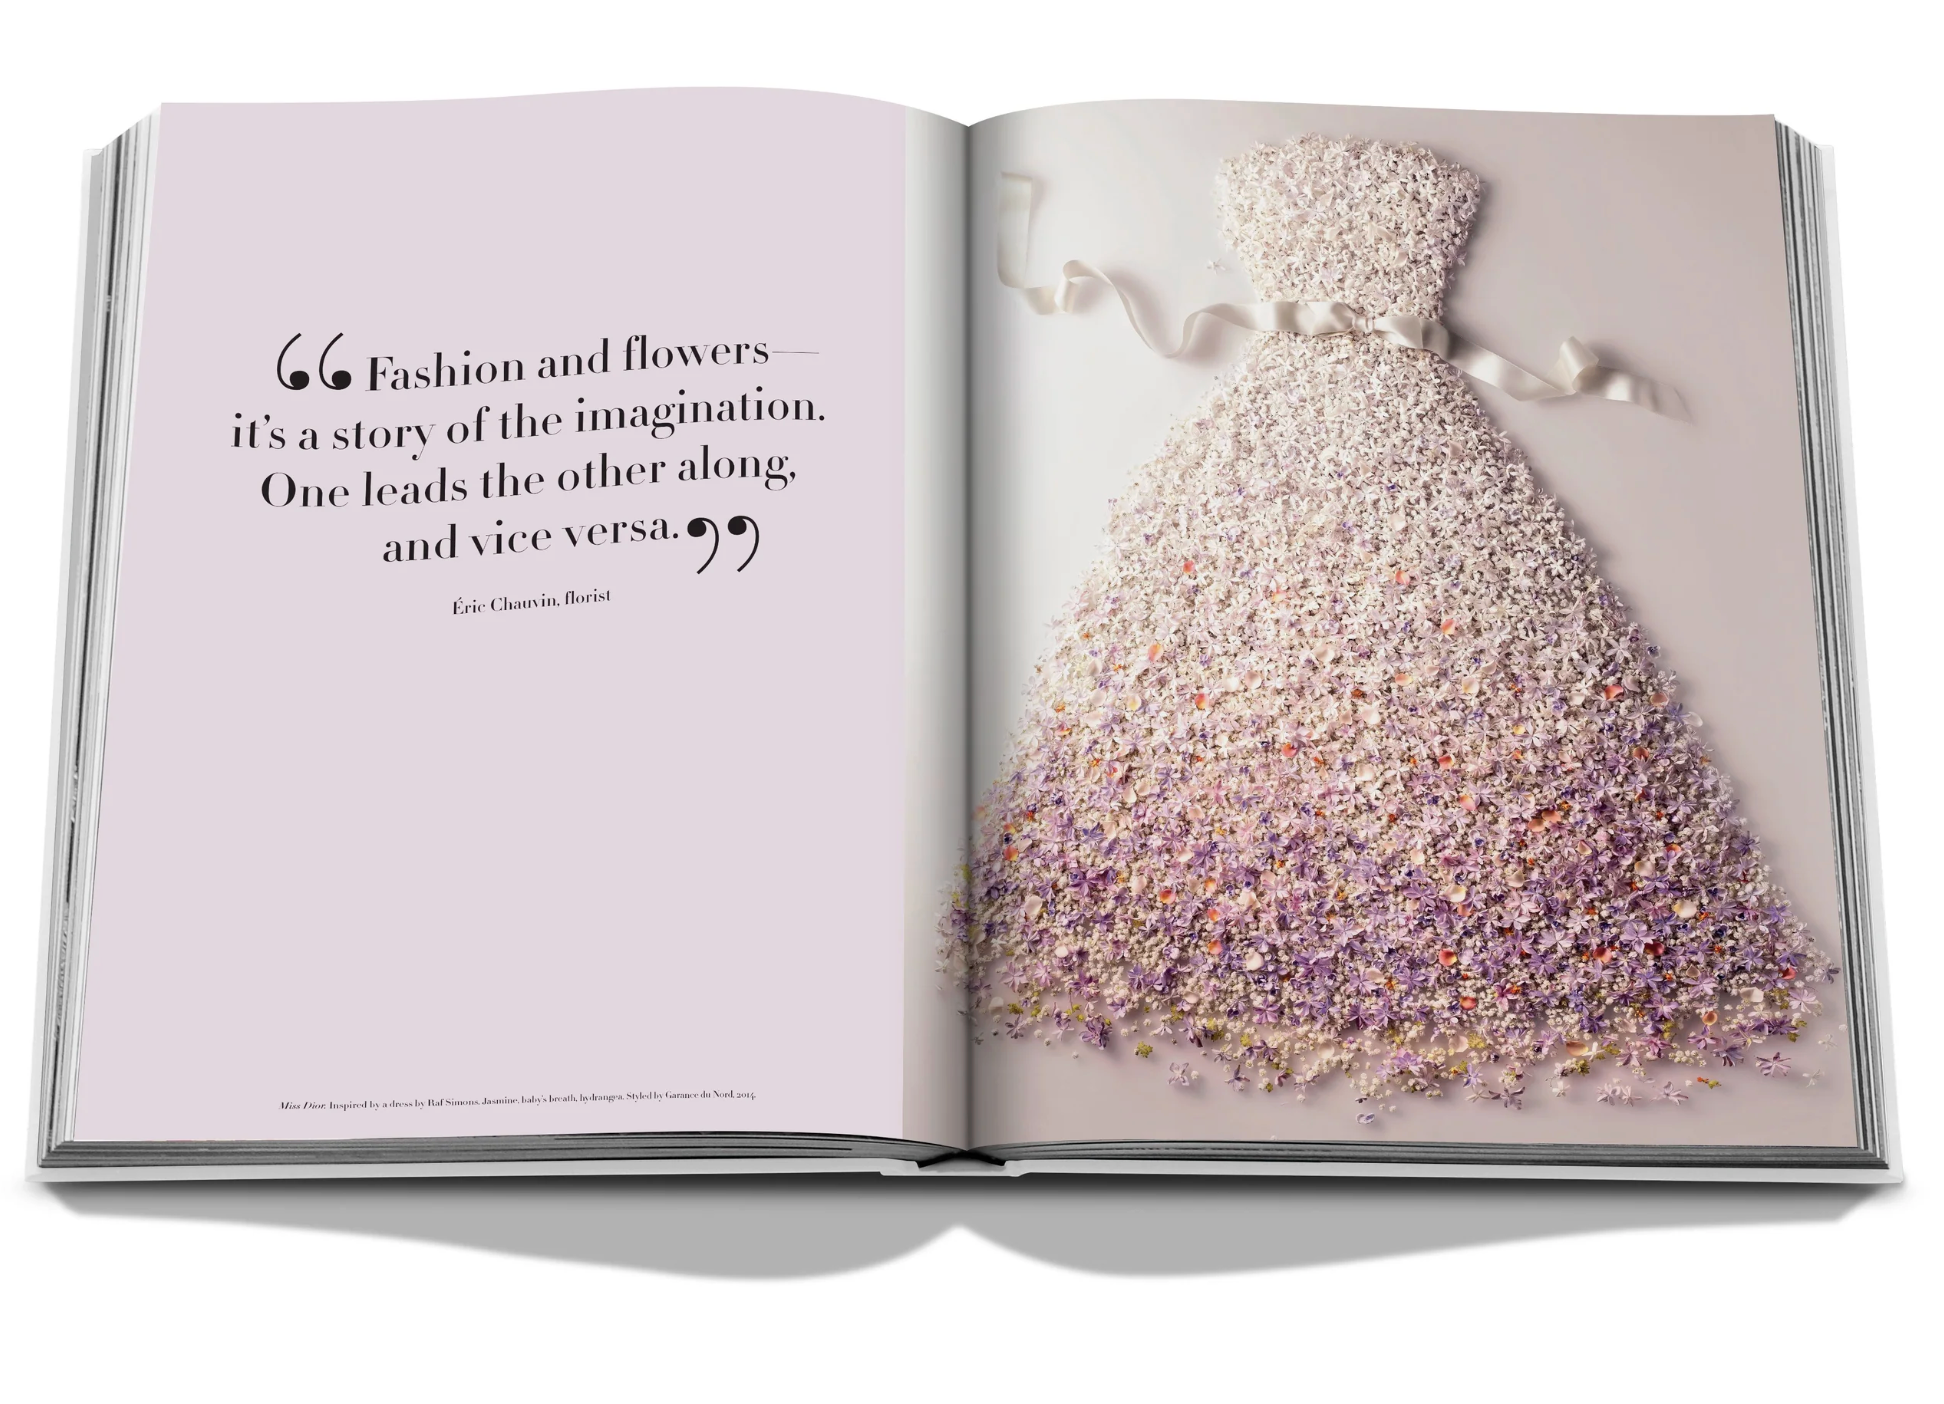 Flowers: Art & Bouquets book by Sixtine Dubly